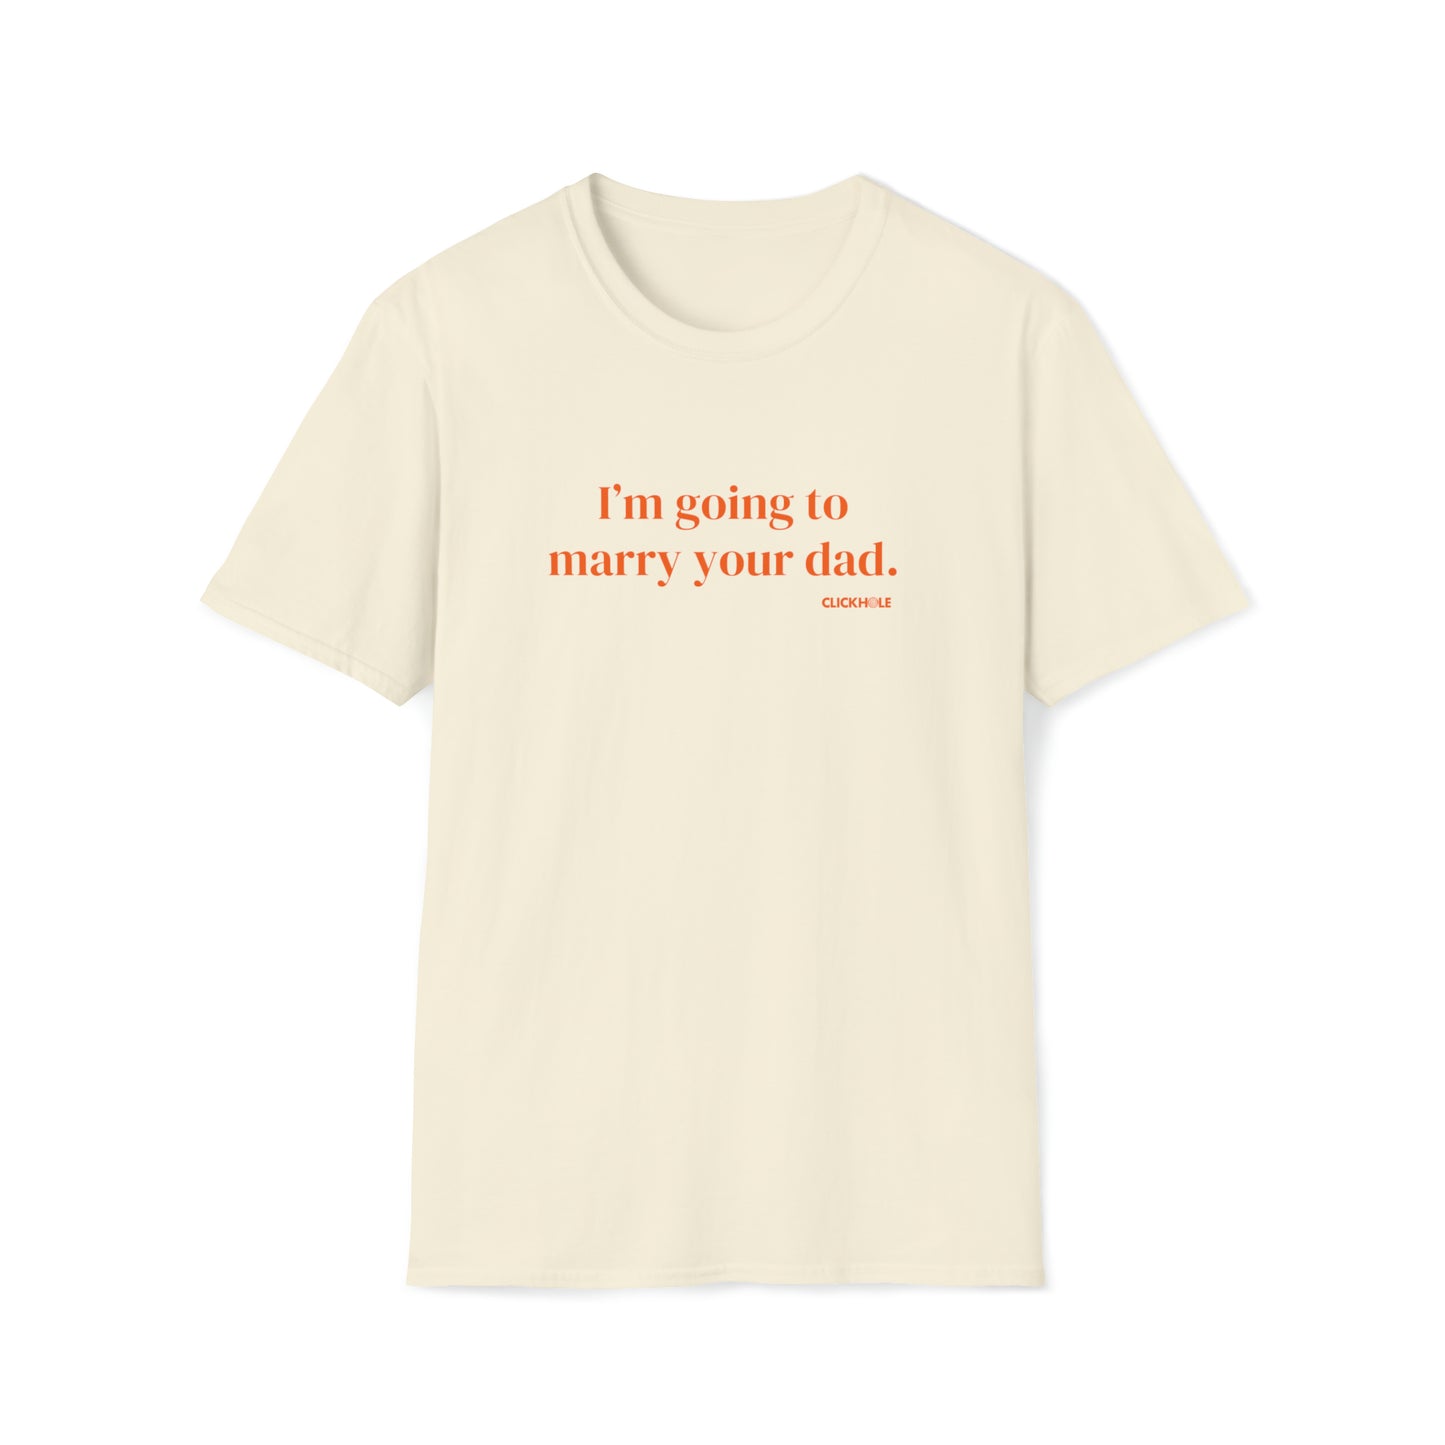 "I'm Going To Marry Your Dad" Shirt